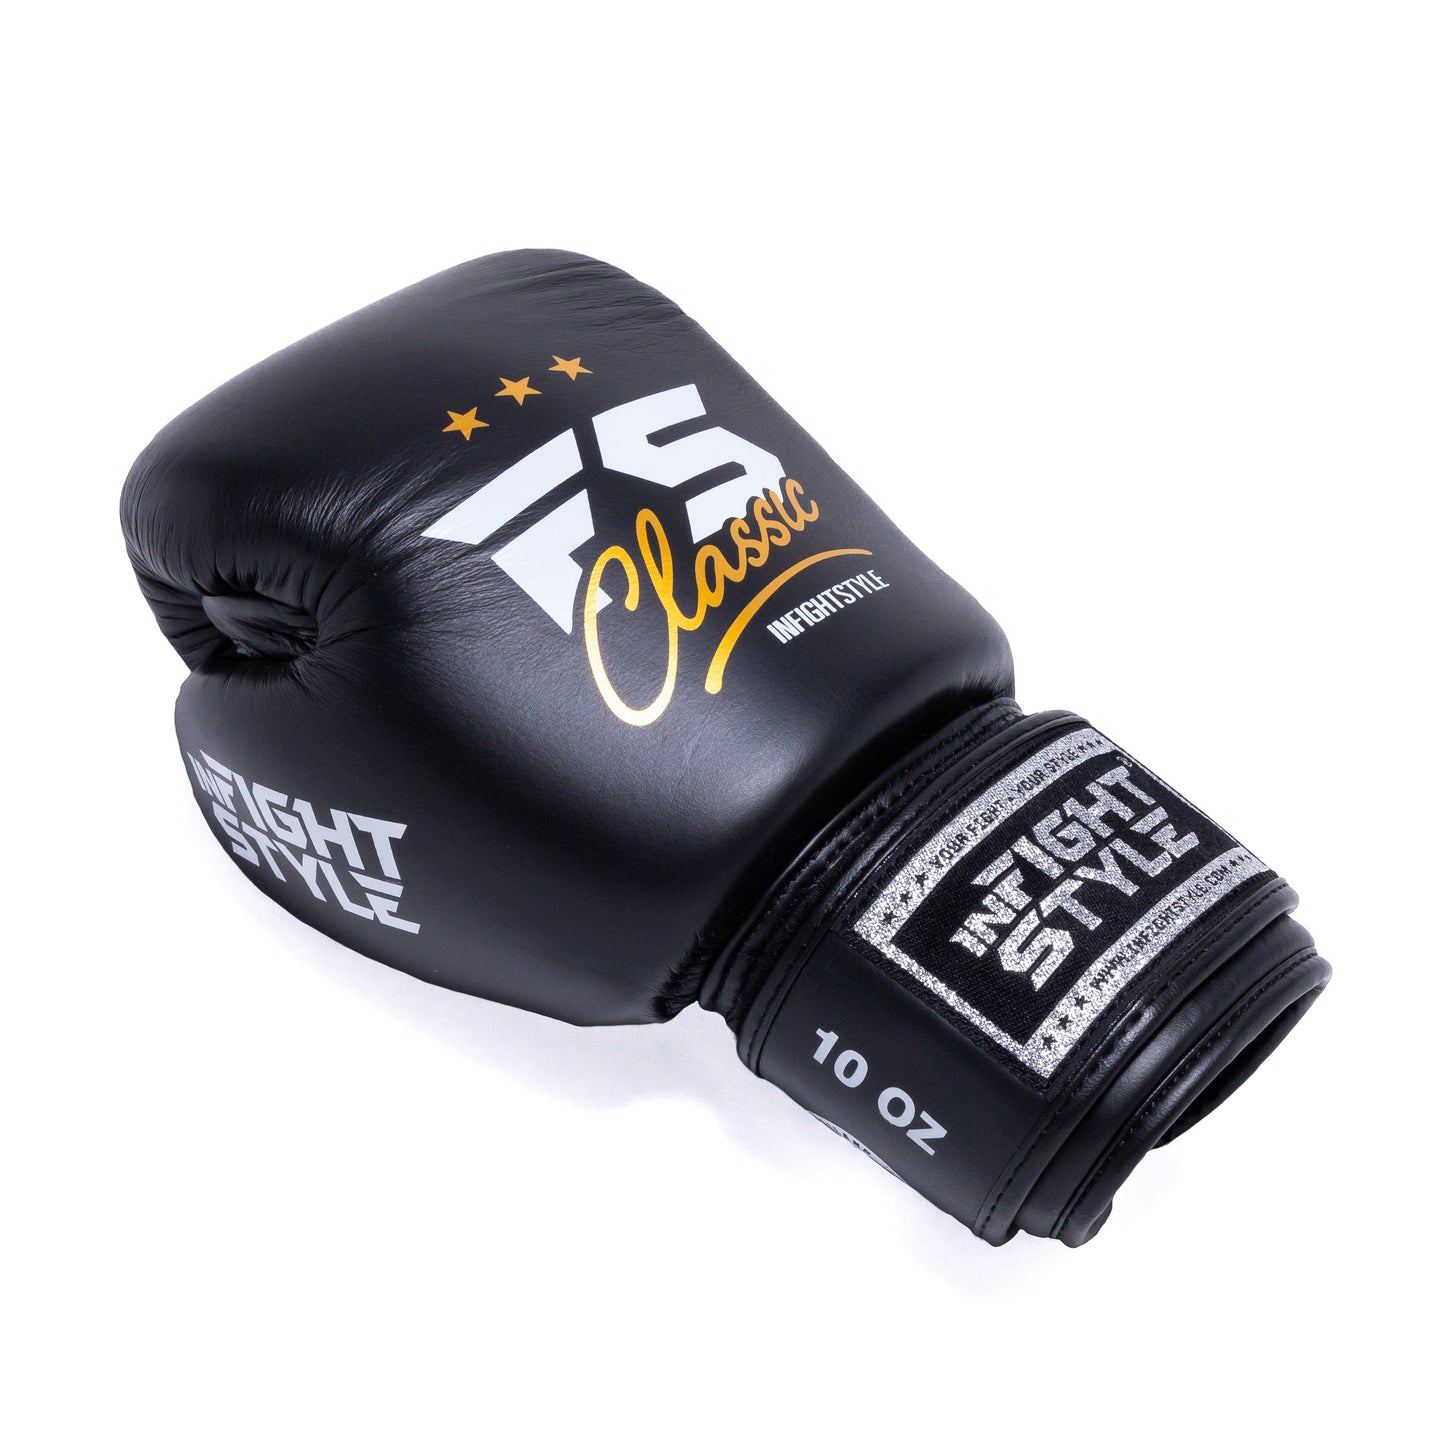 InfightStyle Muay Thai Boxing Pro Classic Leather Gloves - Black